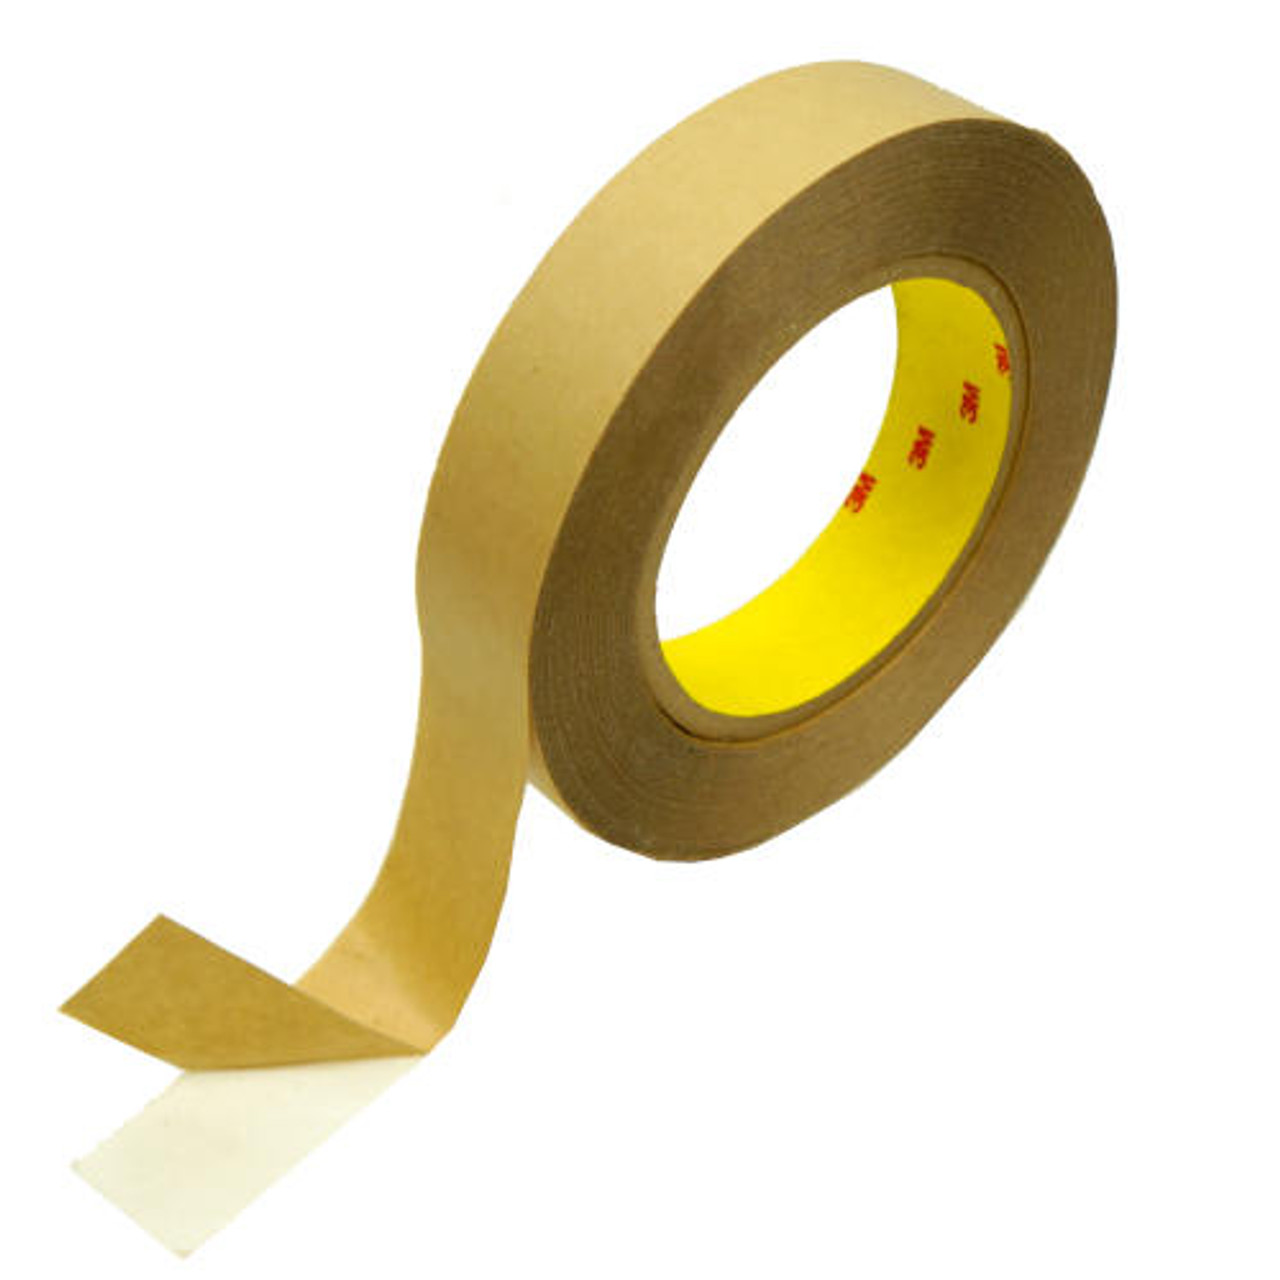 3M 7010535733  180 yd x 54.000 Width Double Sided Tape - All